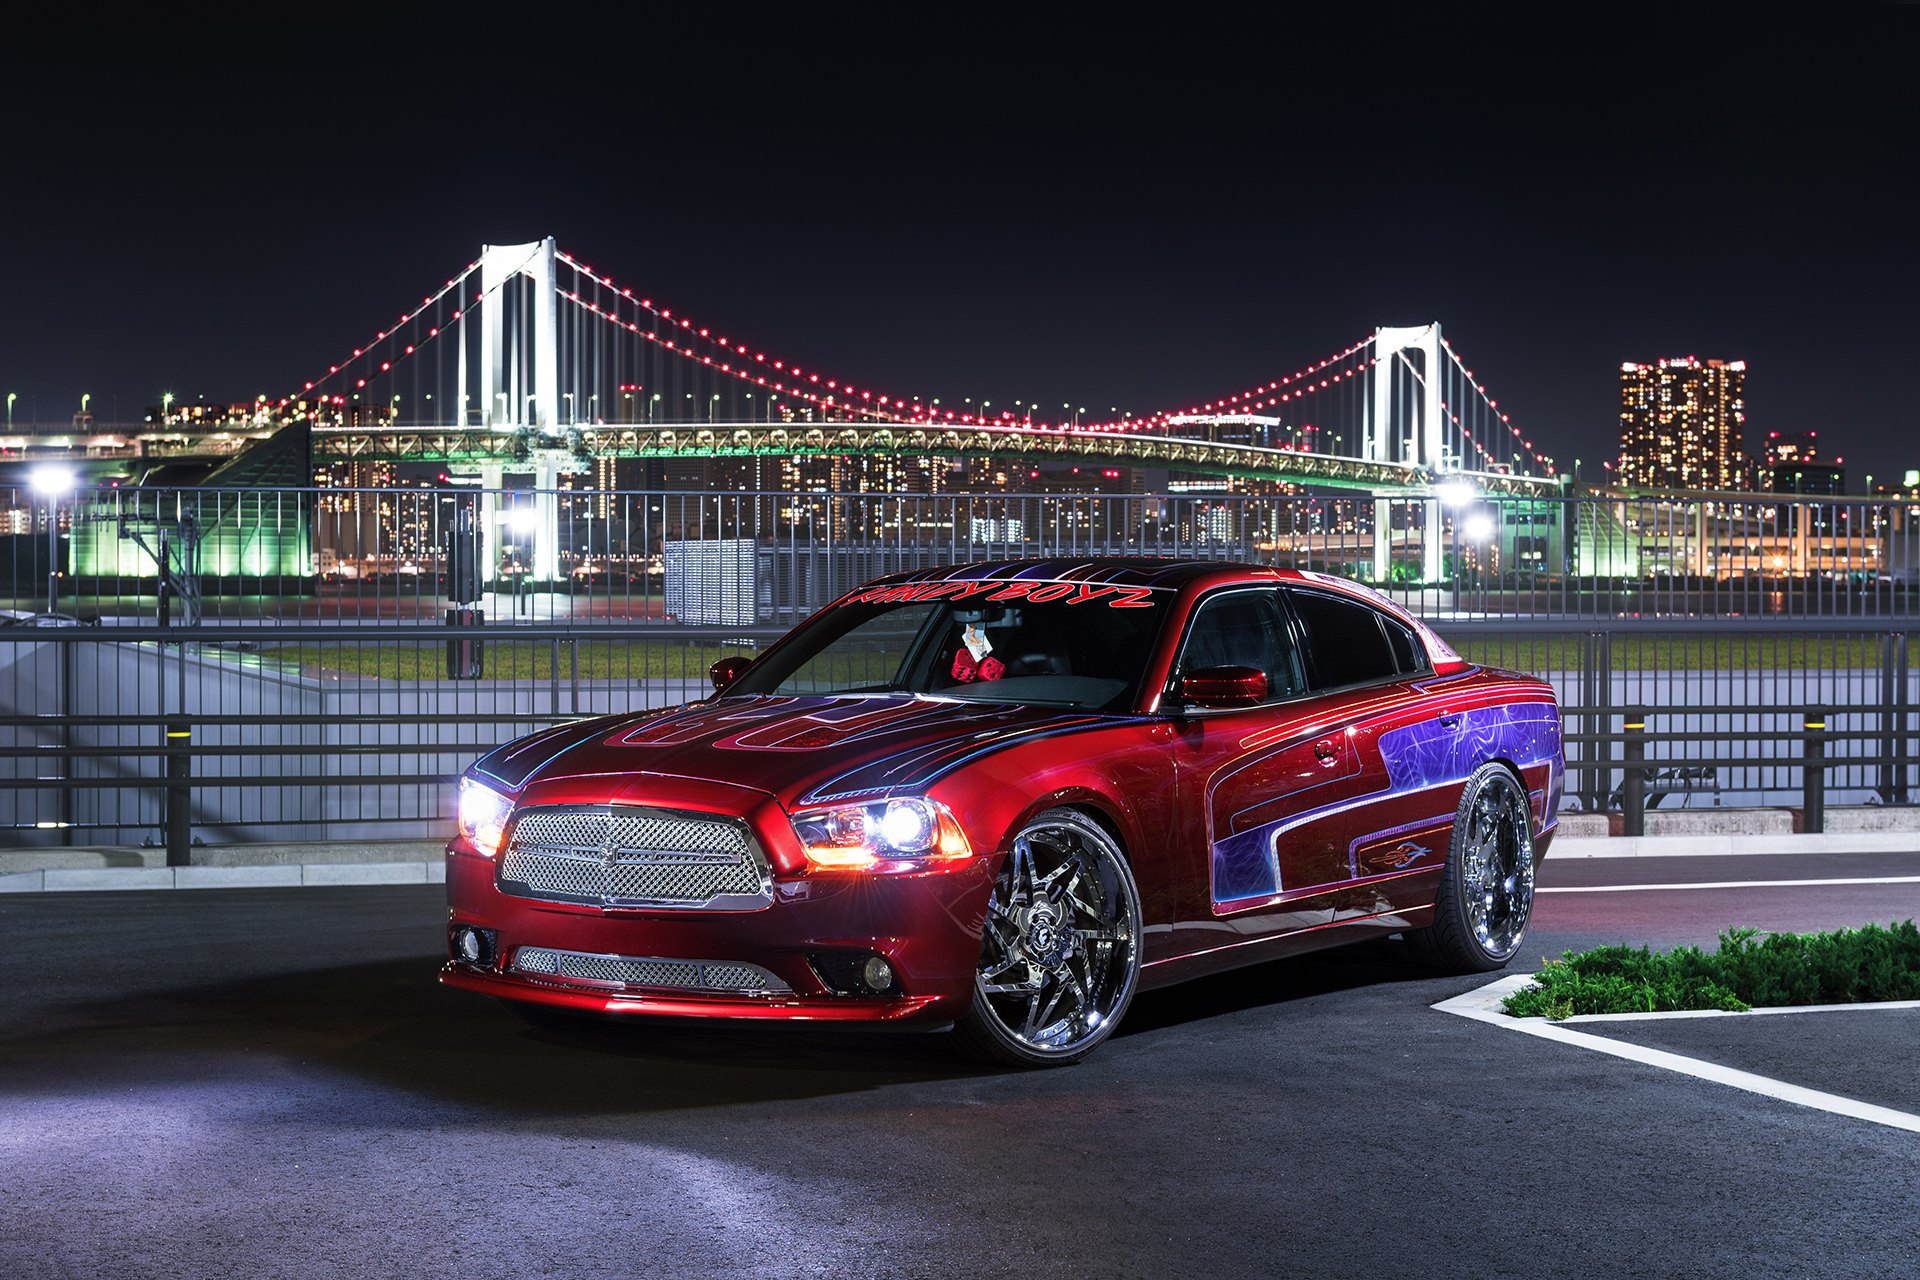 Red Dodge Charger with Custom Chrome Mesh Grille - Photo by Forgiato